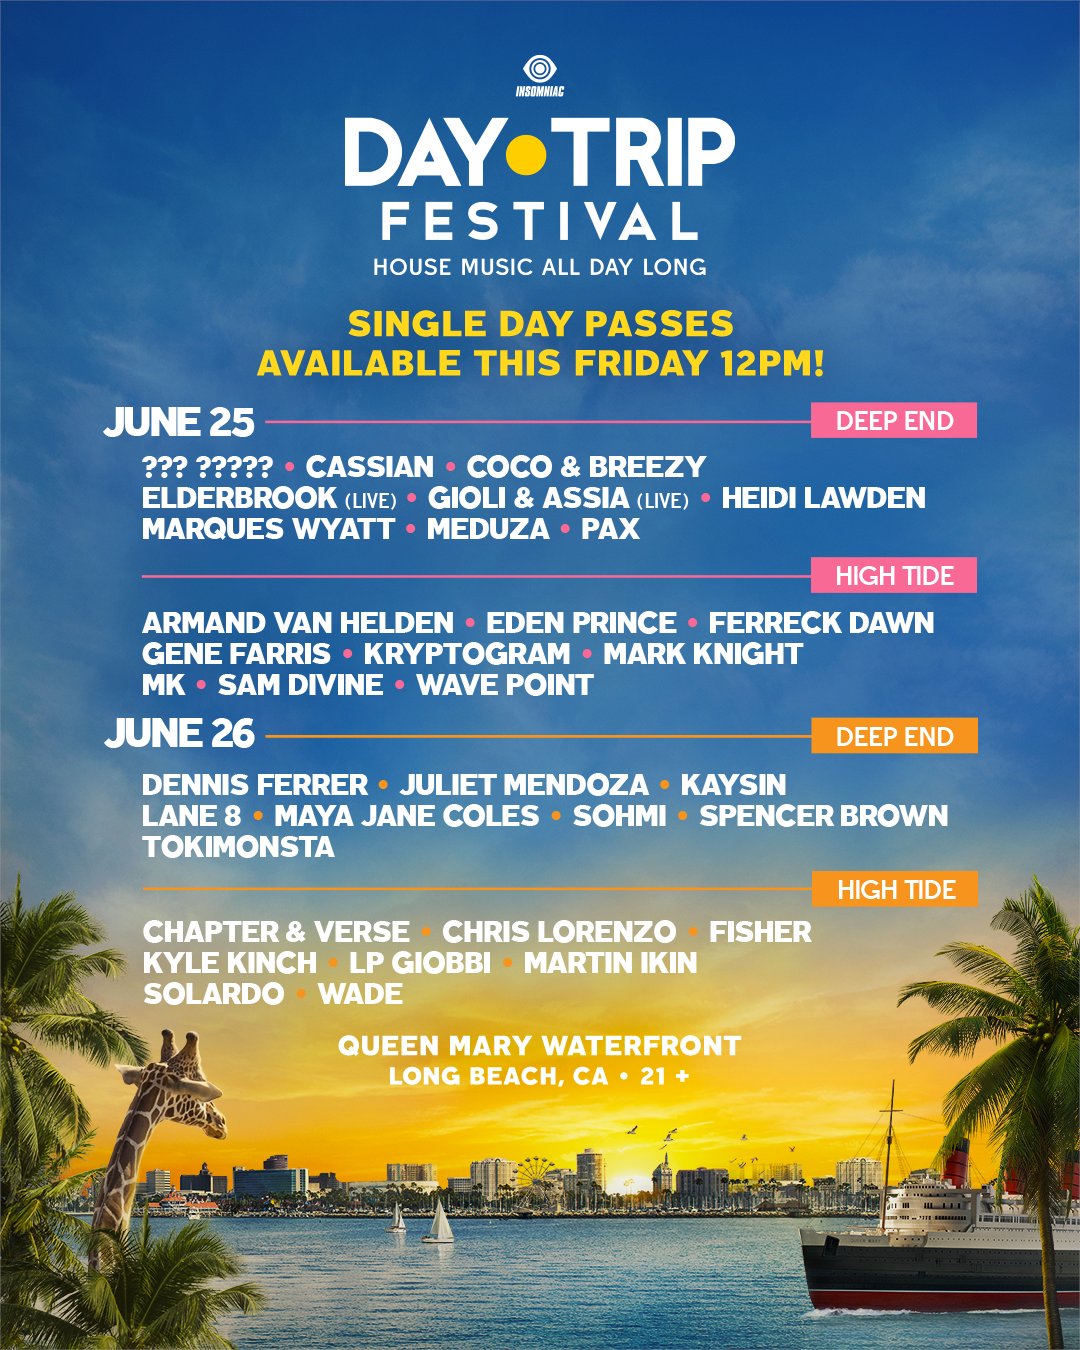 Day Trip Festival Shares Lineup for 2022